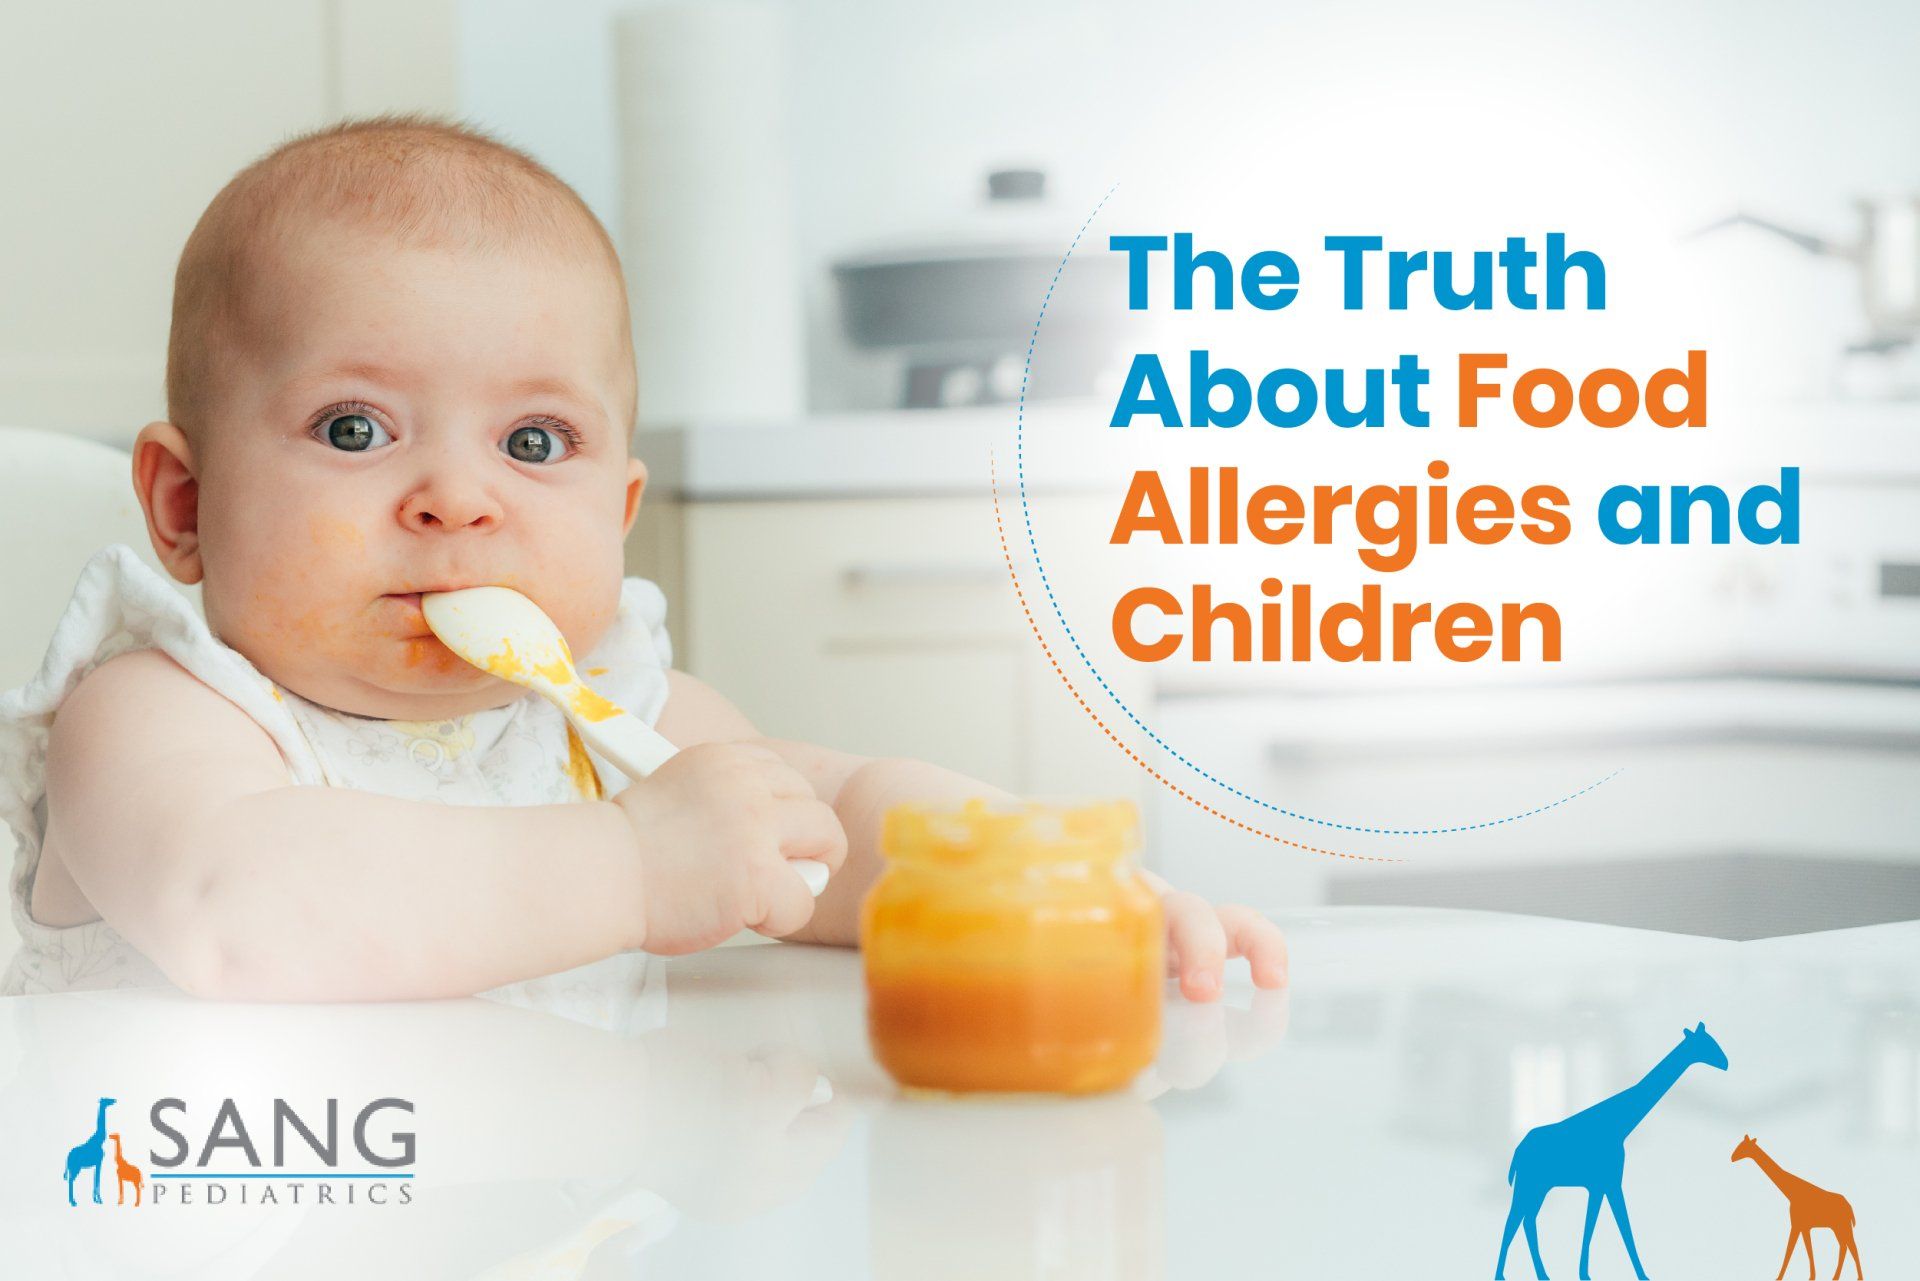 The Truth About Food Allergies and Children